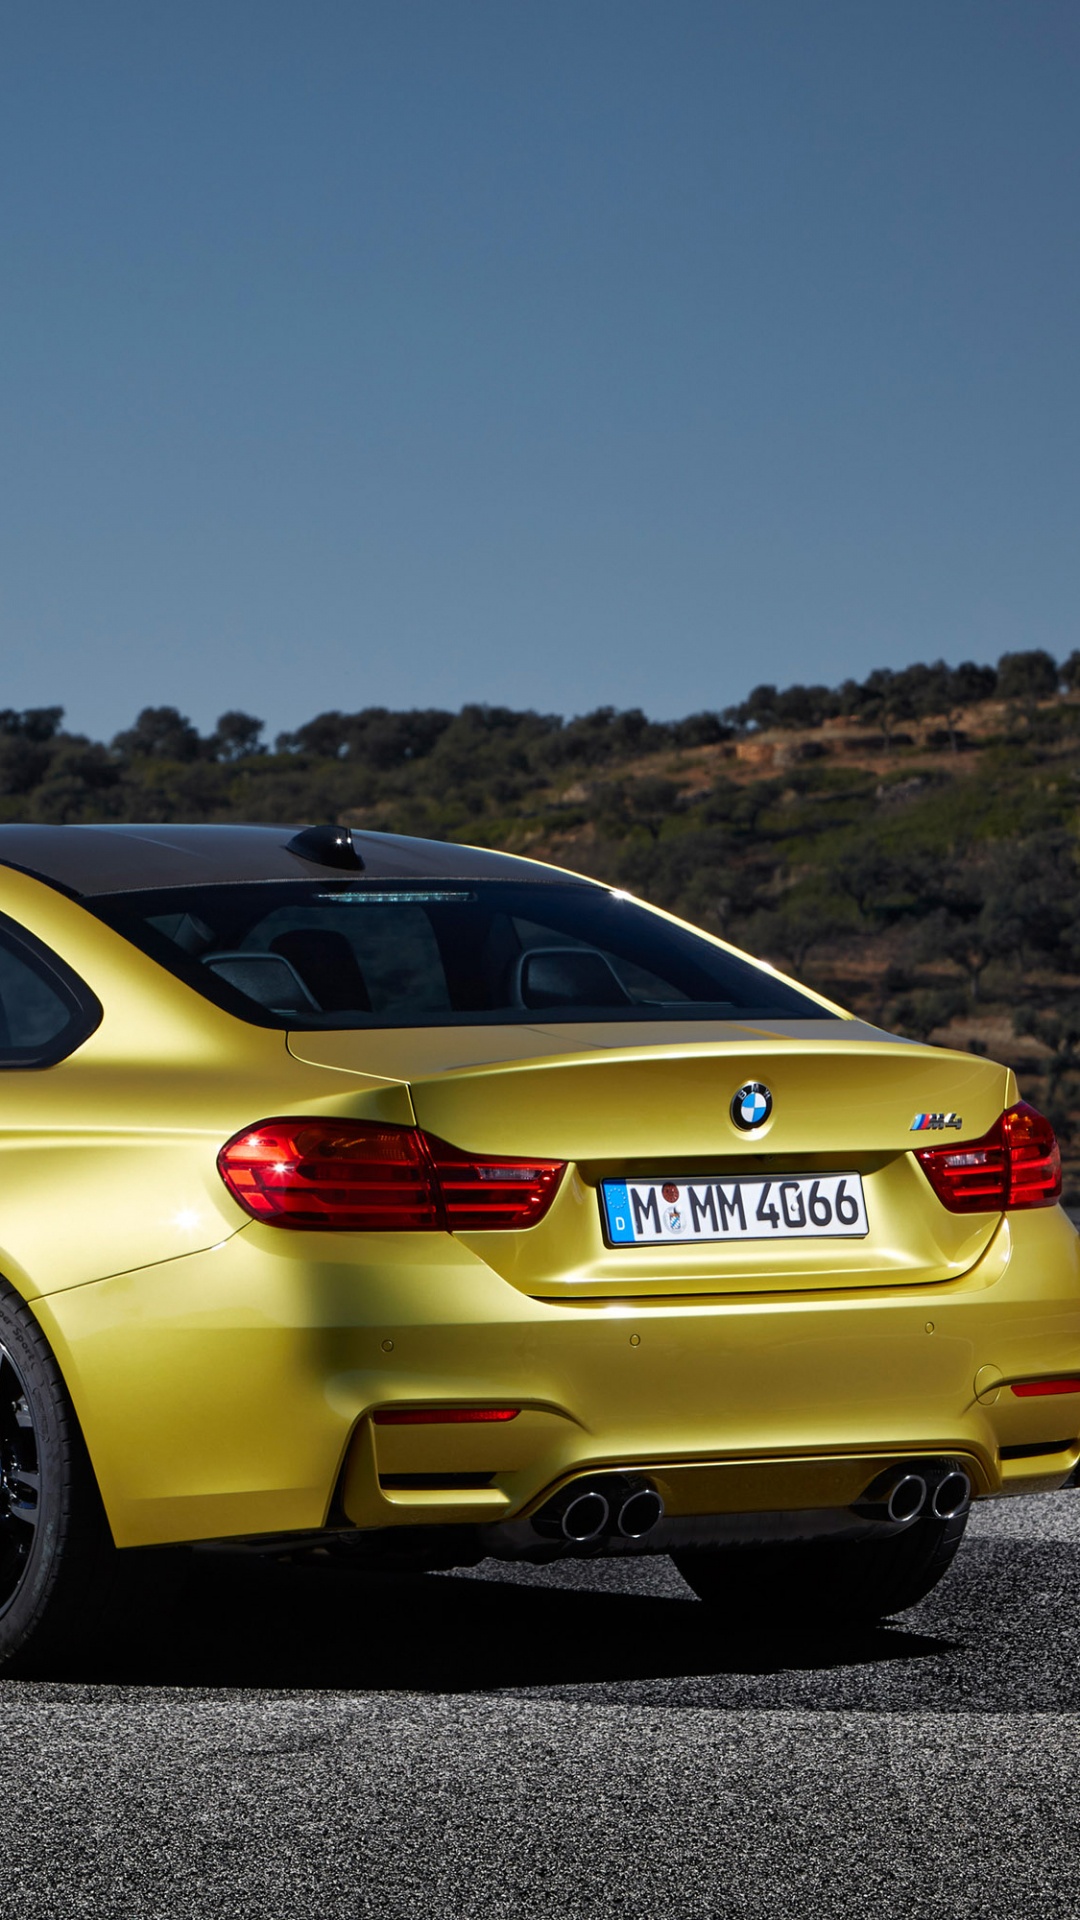 Yellow Bmw m 3 on Road During Daytime. Wallpaper in 1080x1920 Resolution